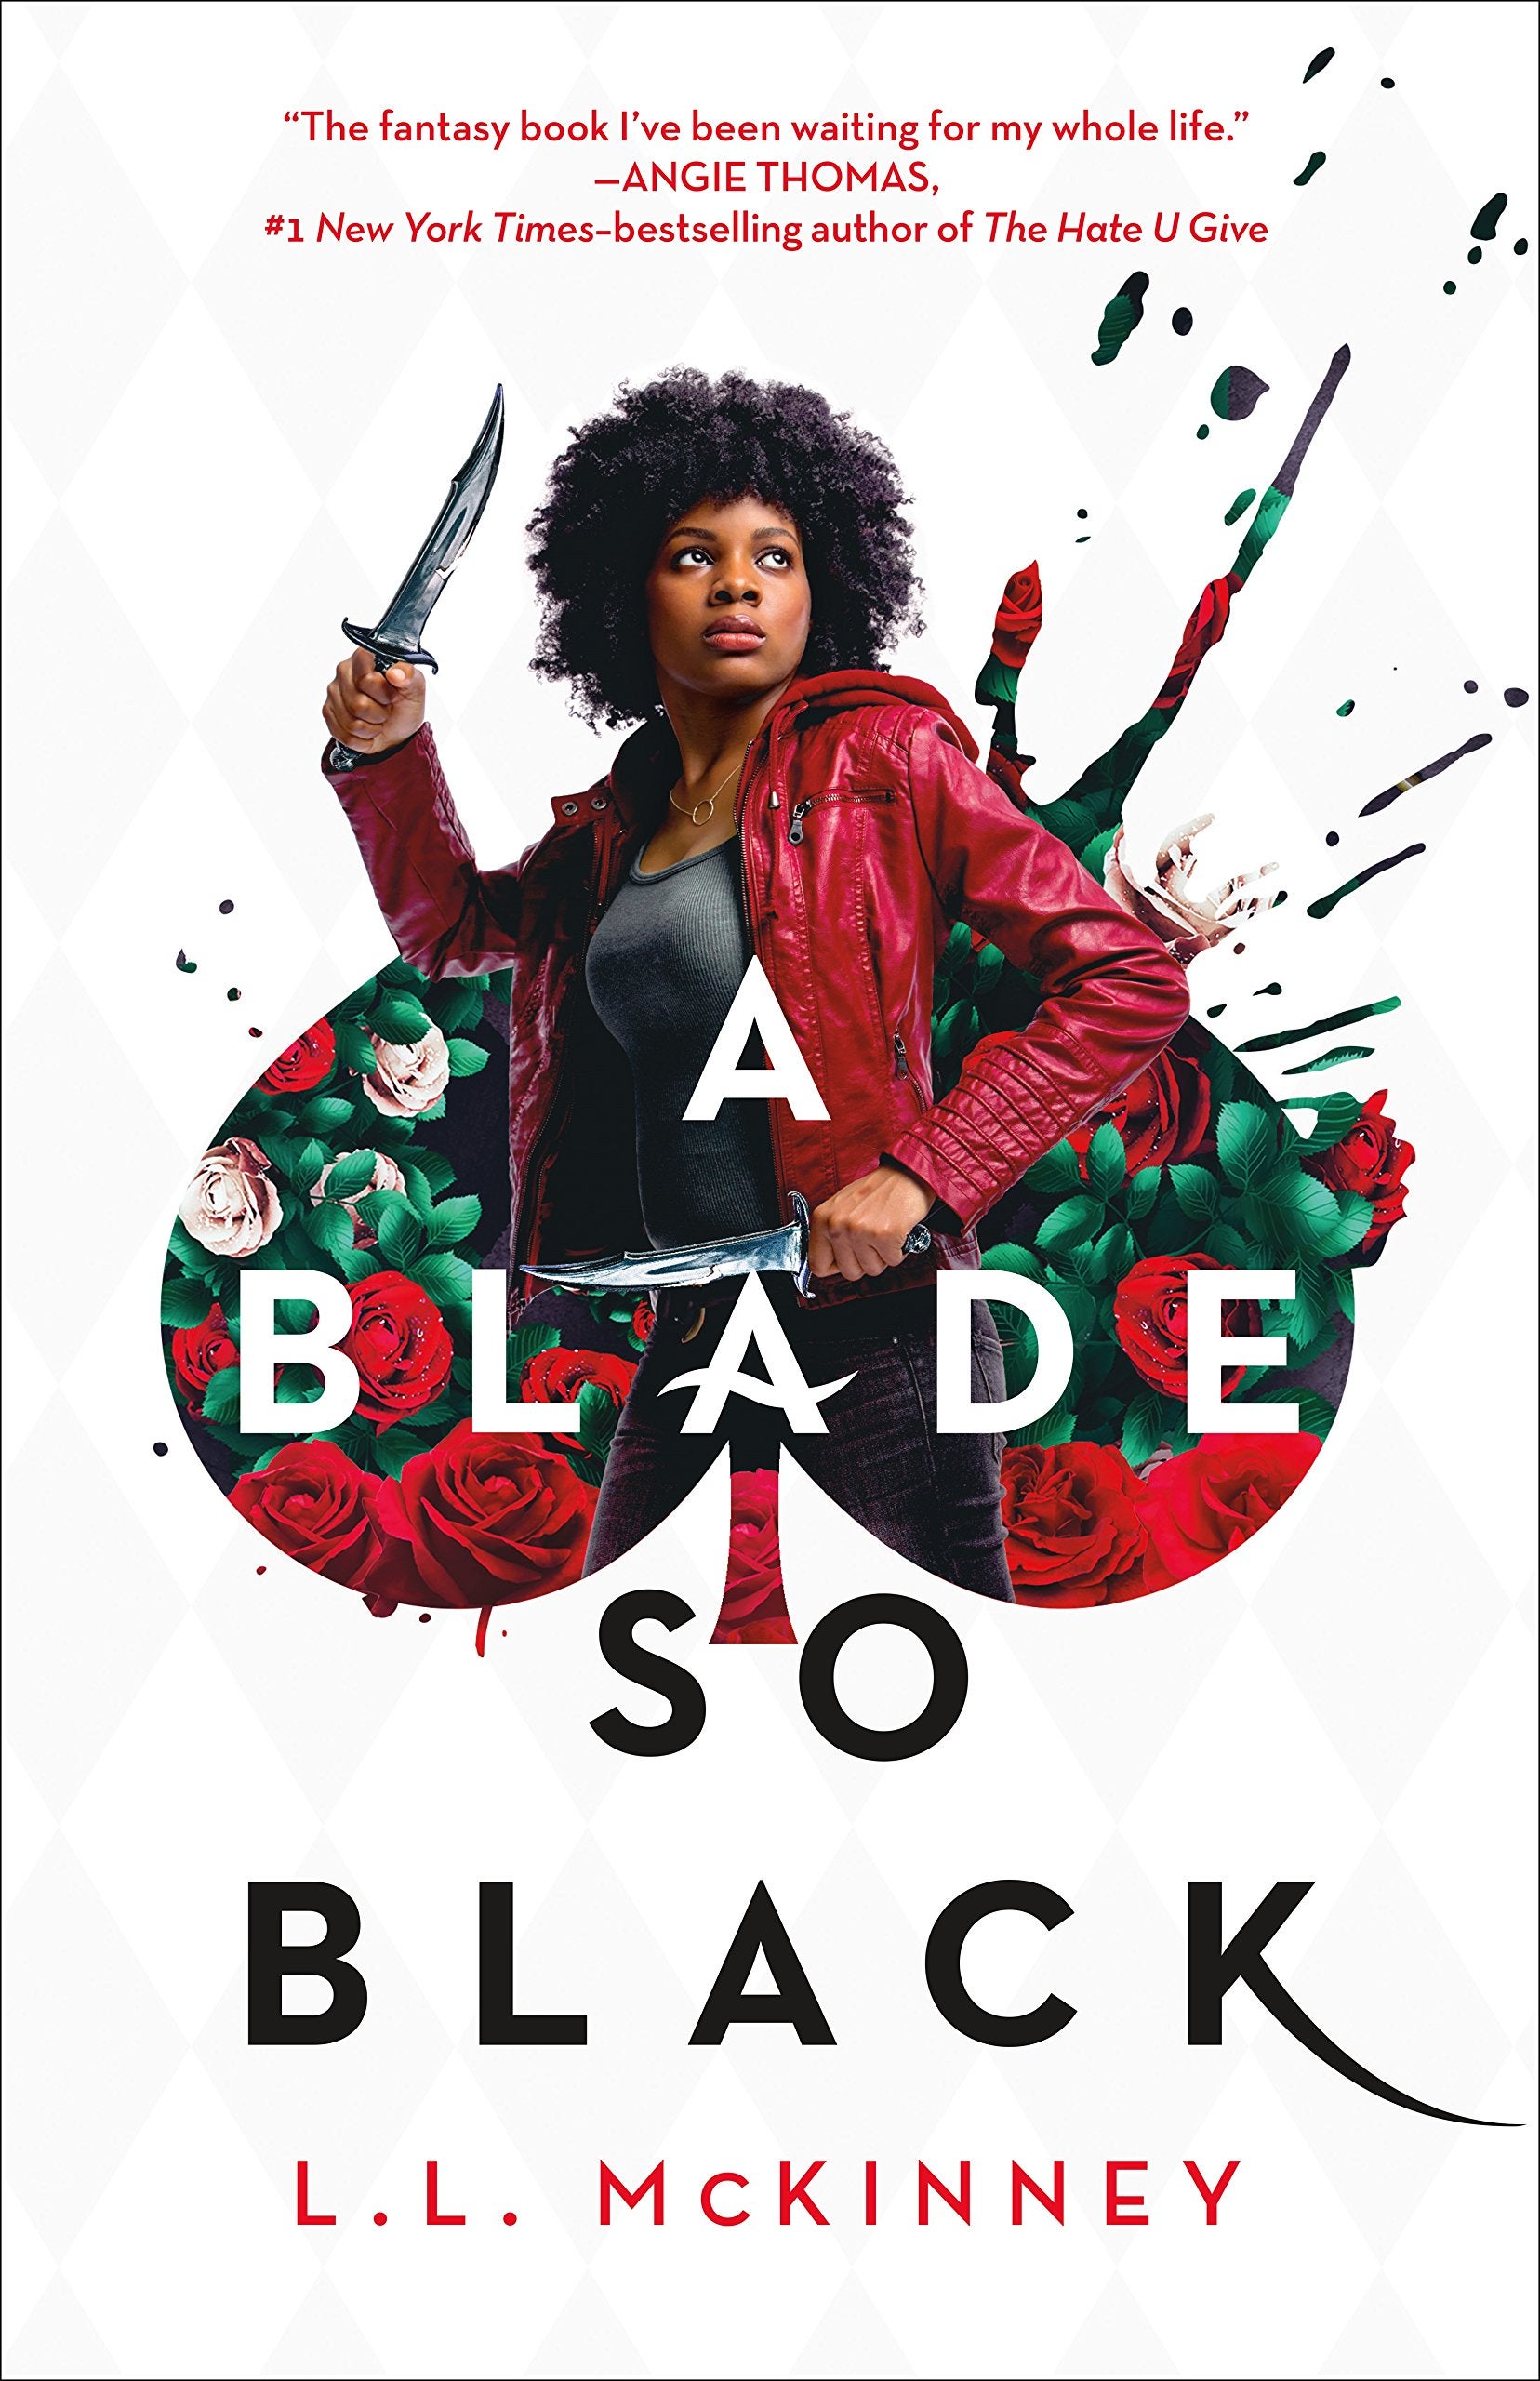 Cover of A Blade so Black, featuring main character wielding a knife